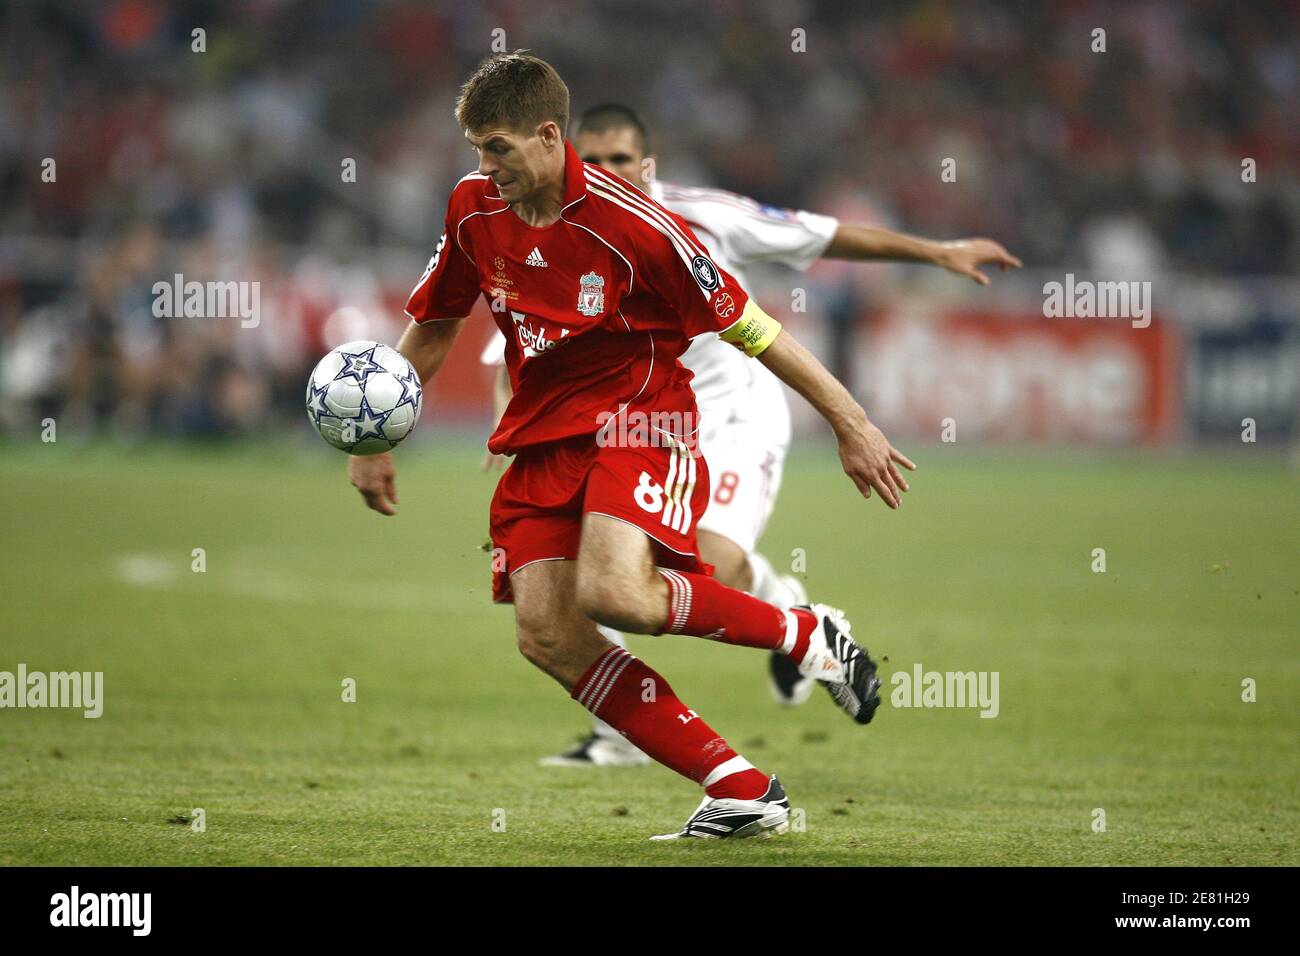 Liverpool's Steven Gerrard in action during the UEFA Champions League Final, AC Milan v Liverpool at Olympic Stadium, in Athens, Greece, on May 23, 2007. AC Milan won 2-1. Photo by Christian Liewig/ABACAPRESS.COM Stock Photo